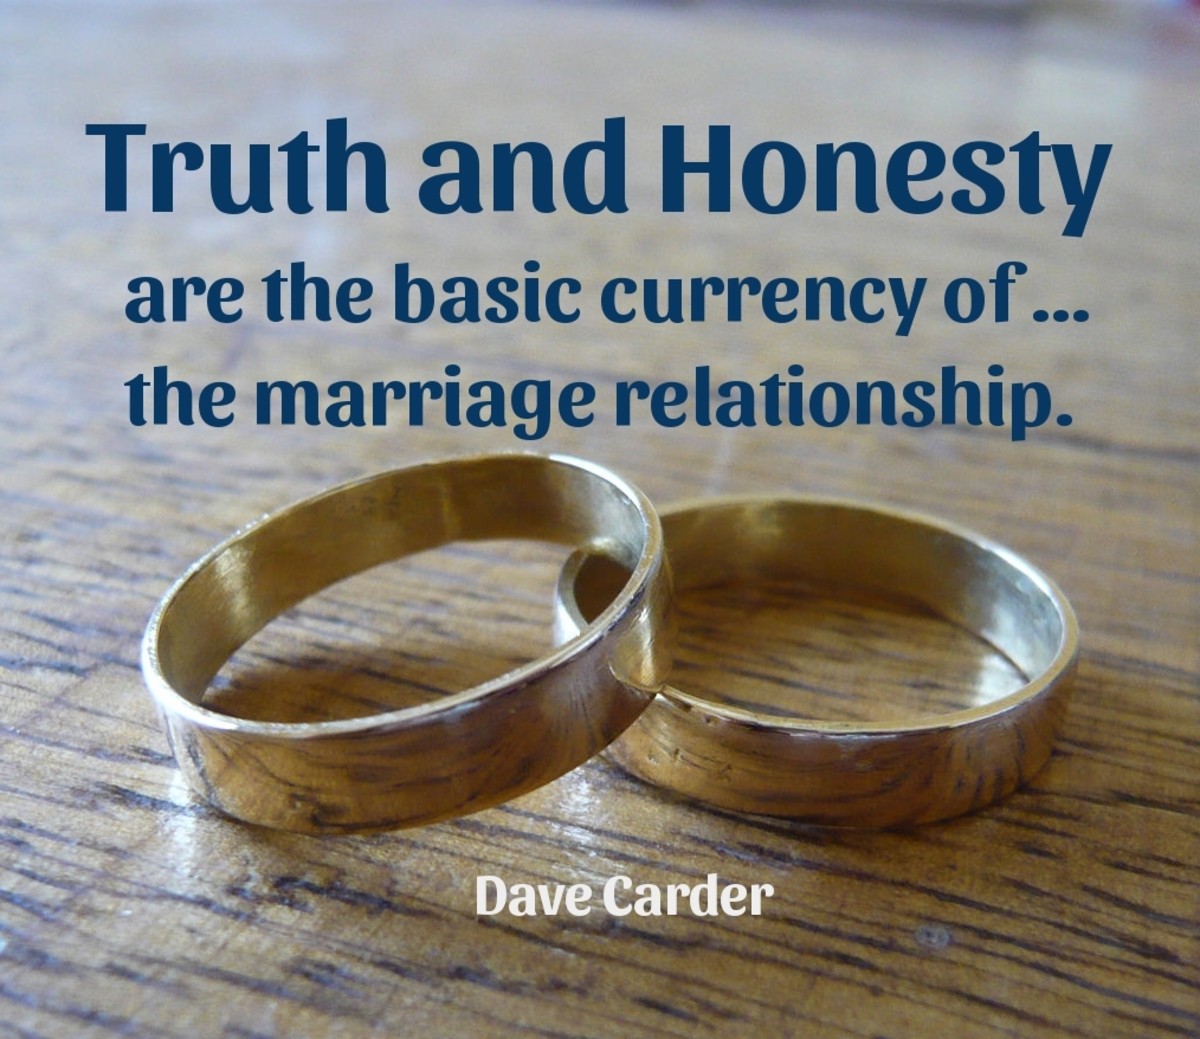 Truth and honesty are the basic currency of ... the marriage relationship.